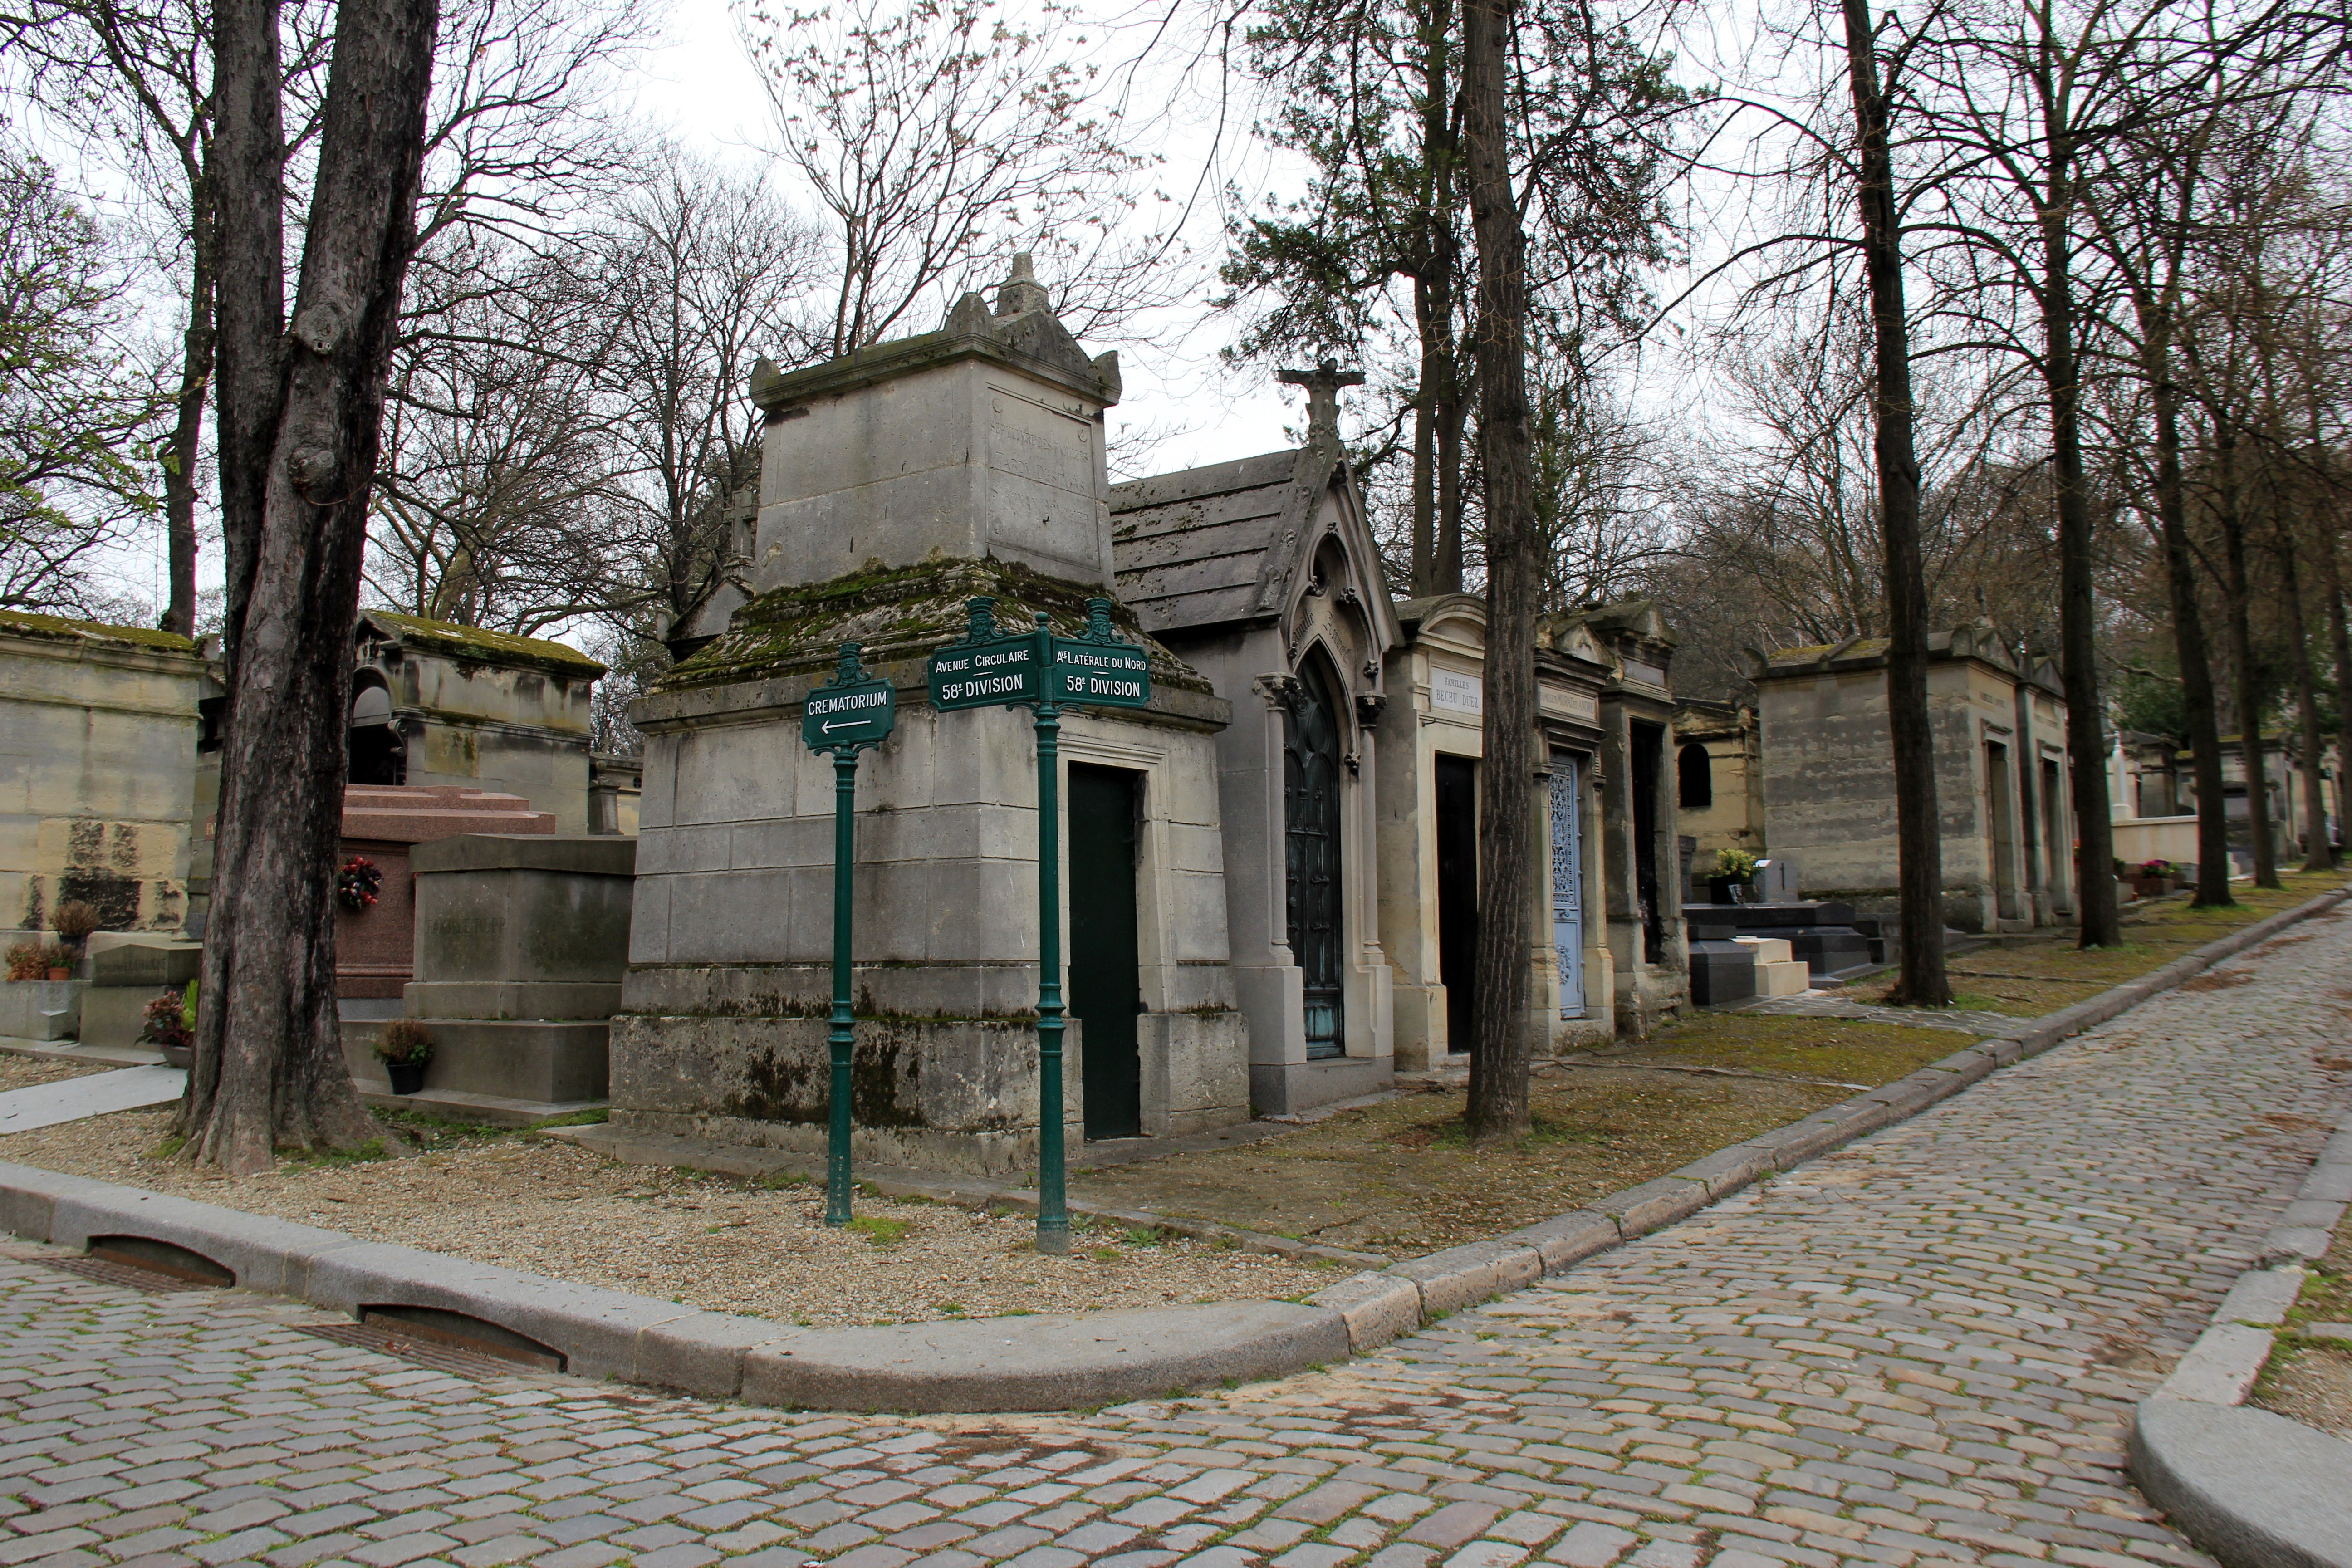 Looking for Jim Morrison’s grave in Pere Lachaise Cemetery 